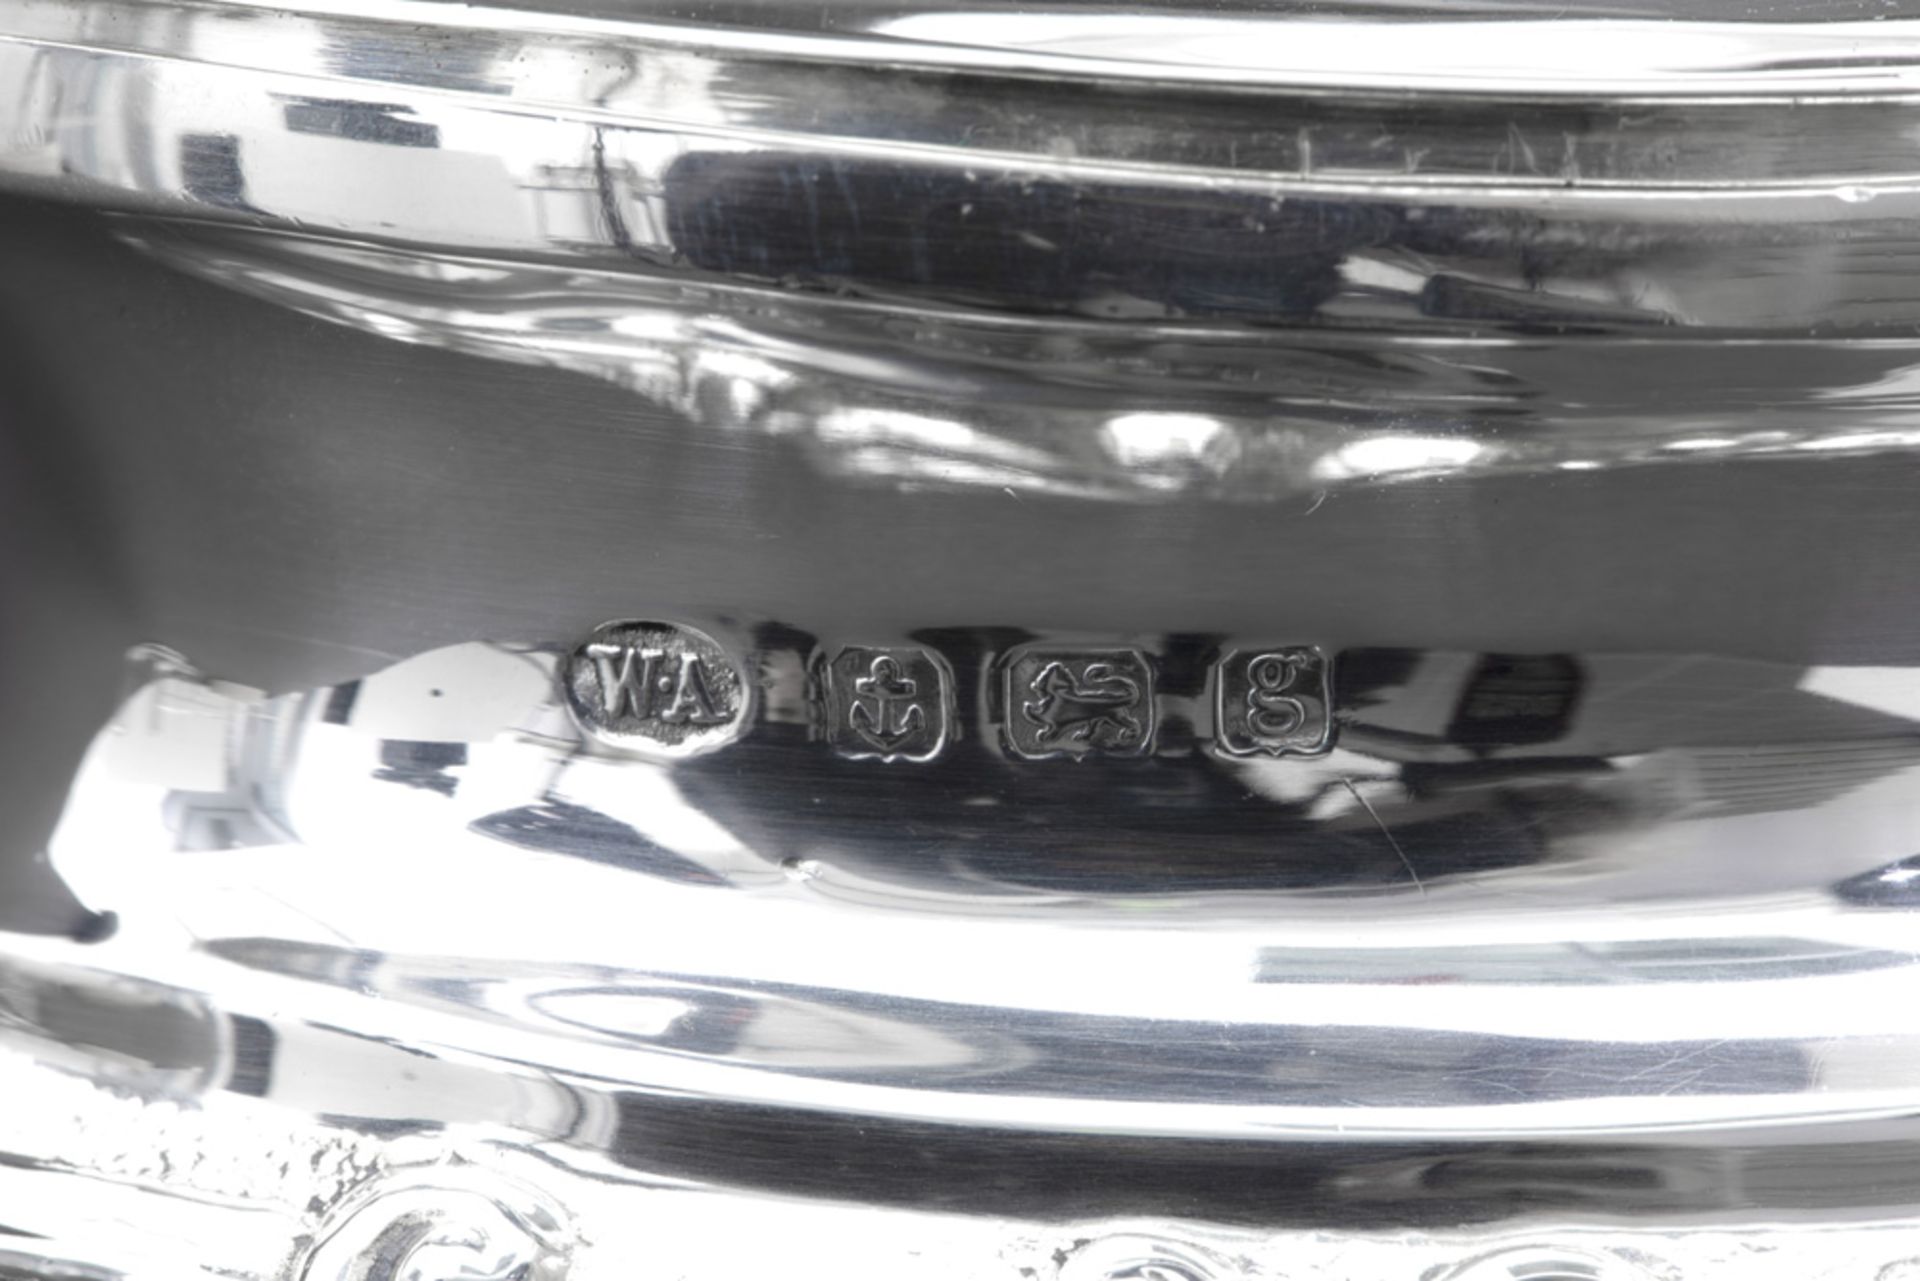 antique tea box in William Aitkin signed and marked silver || WILLIAM AITKIN antieke theedoos met - Image 3 of 3